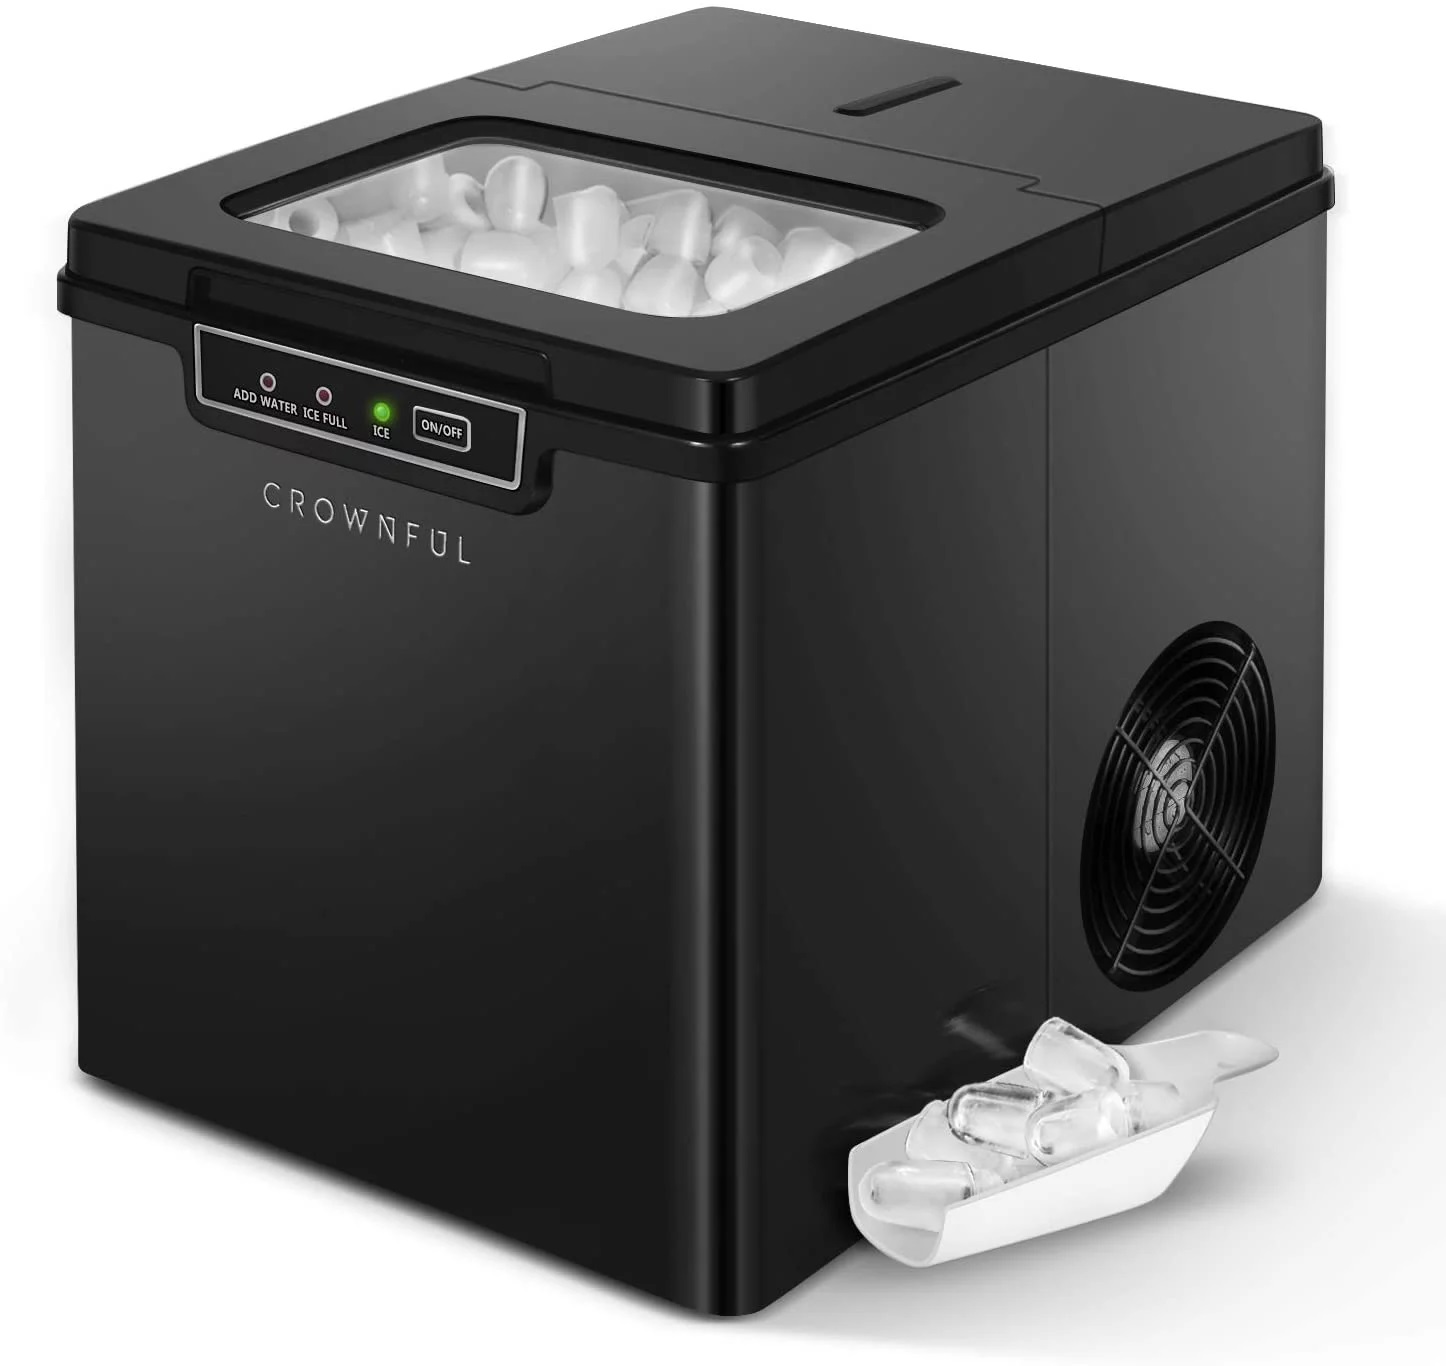 How To Clean Crownful Ice Maker